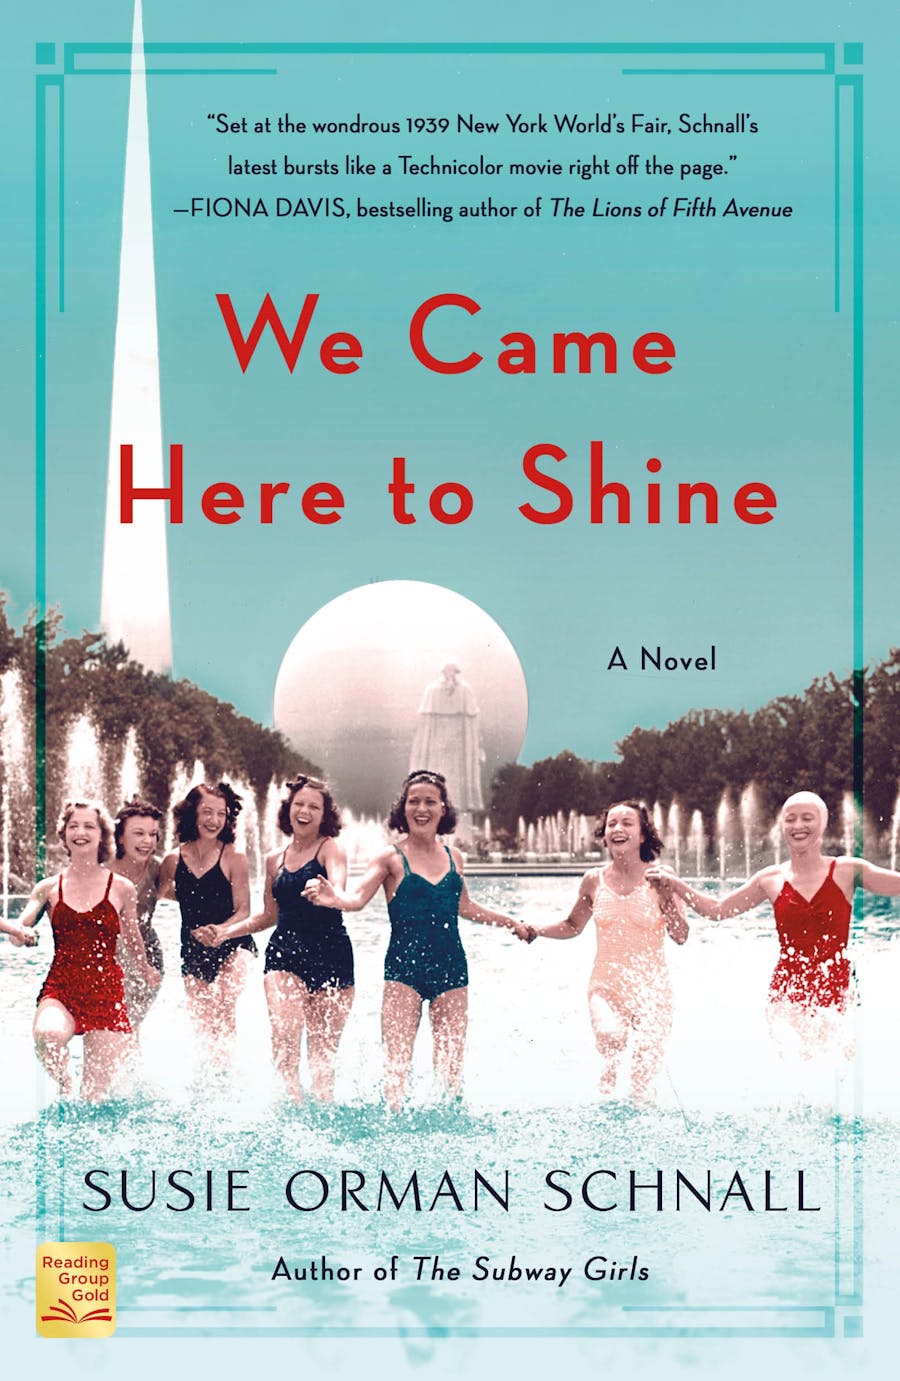 We Came Here to Shine by Susie Orman Schnall